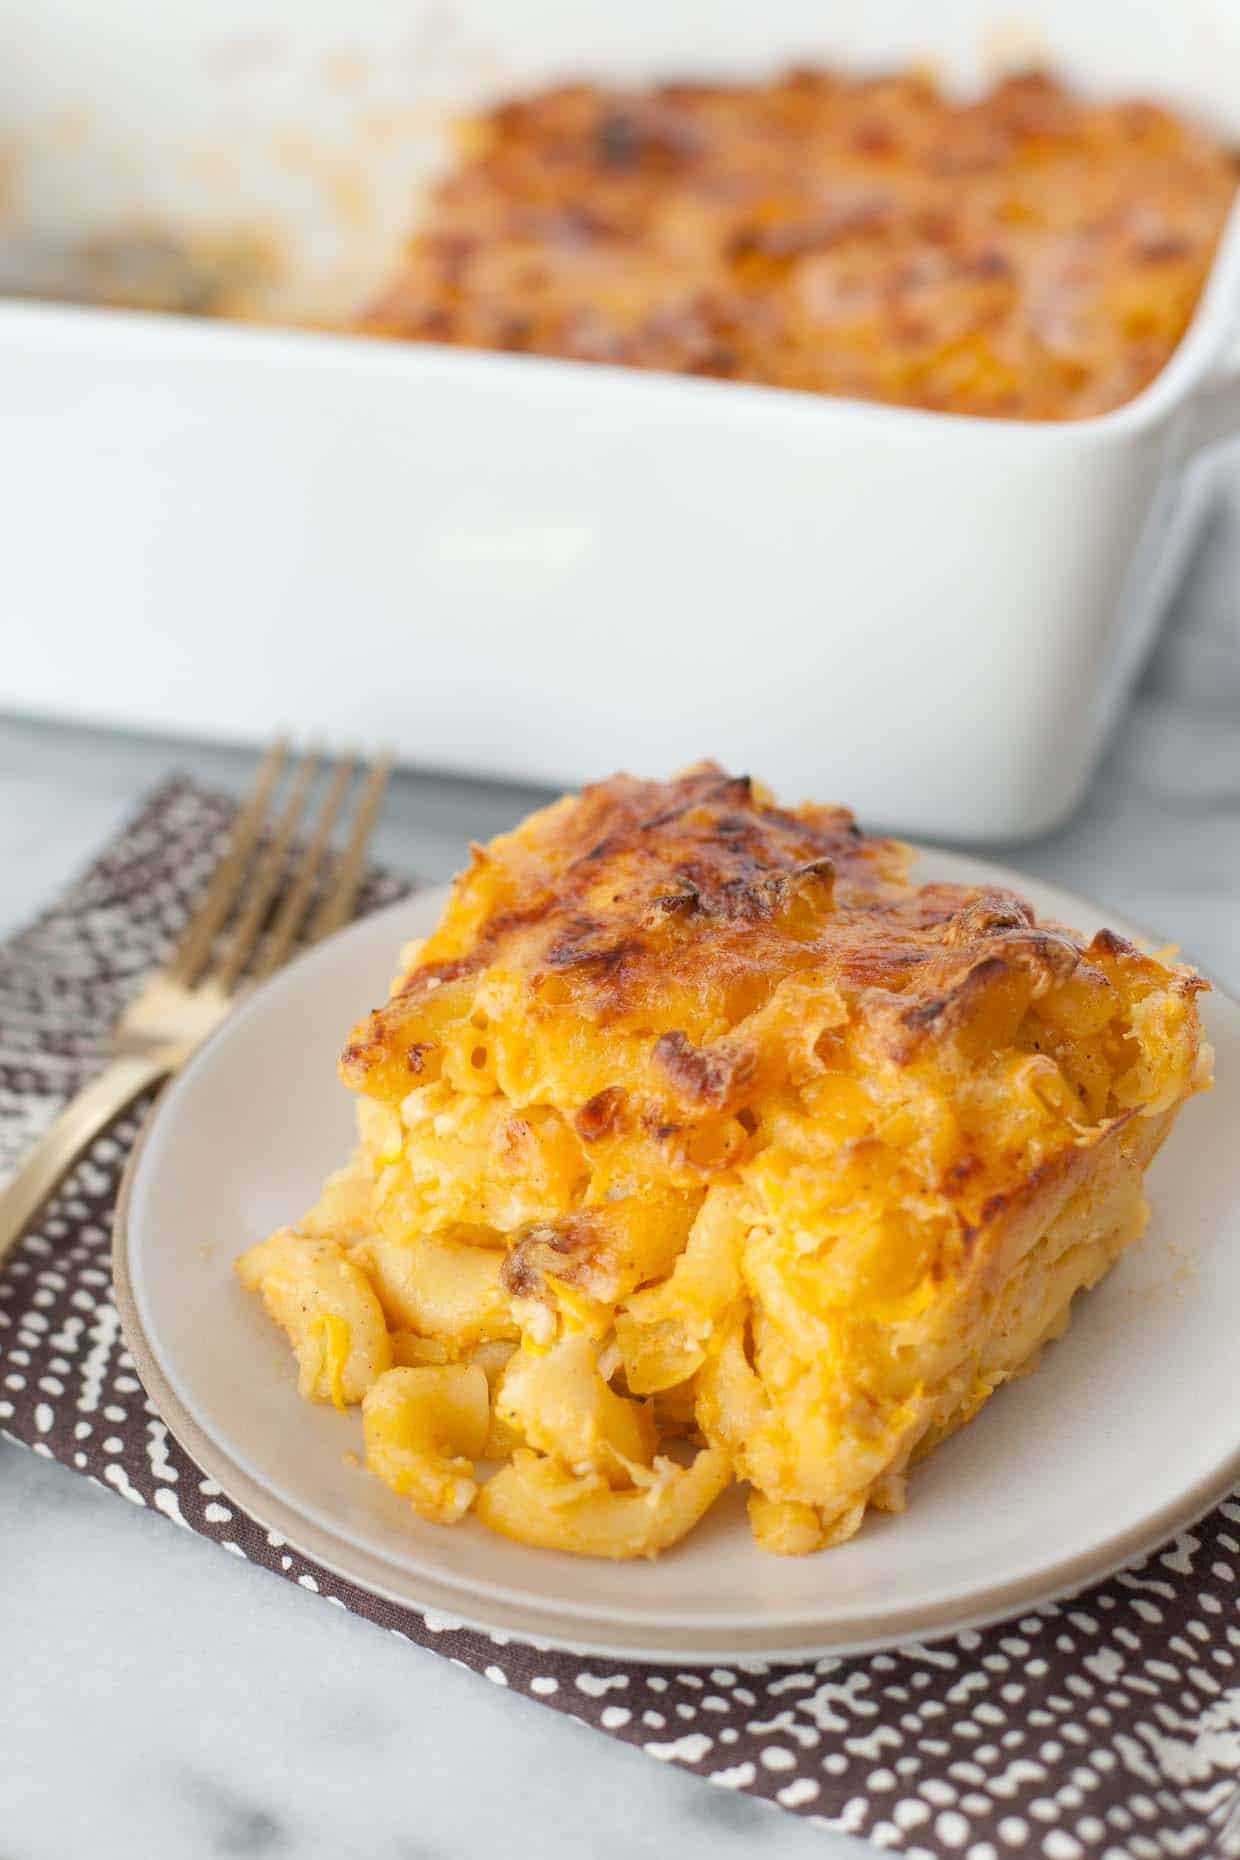 Baked Gluten-Free Mac and Cheese